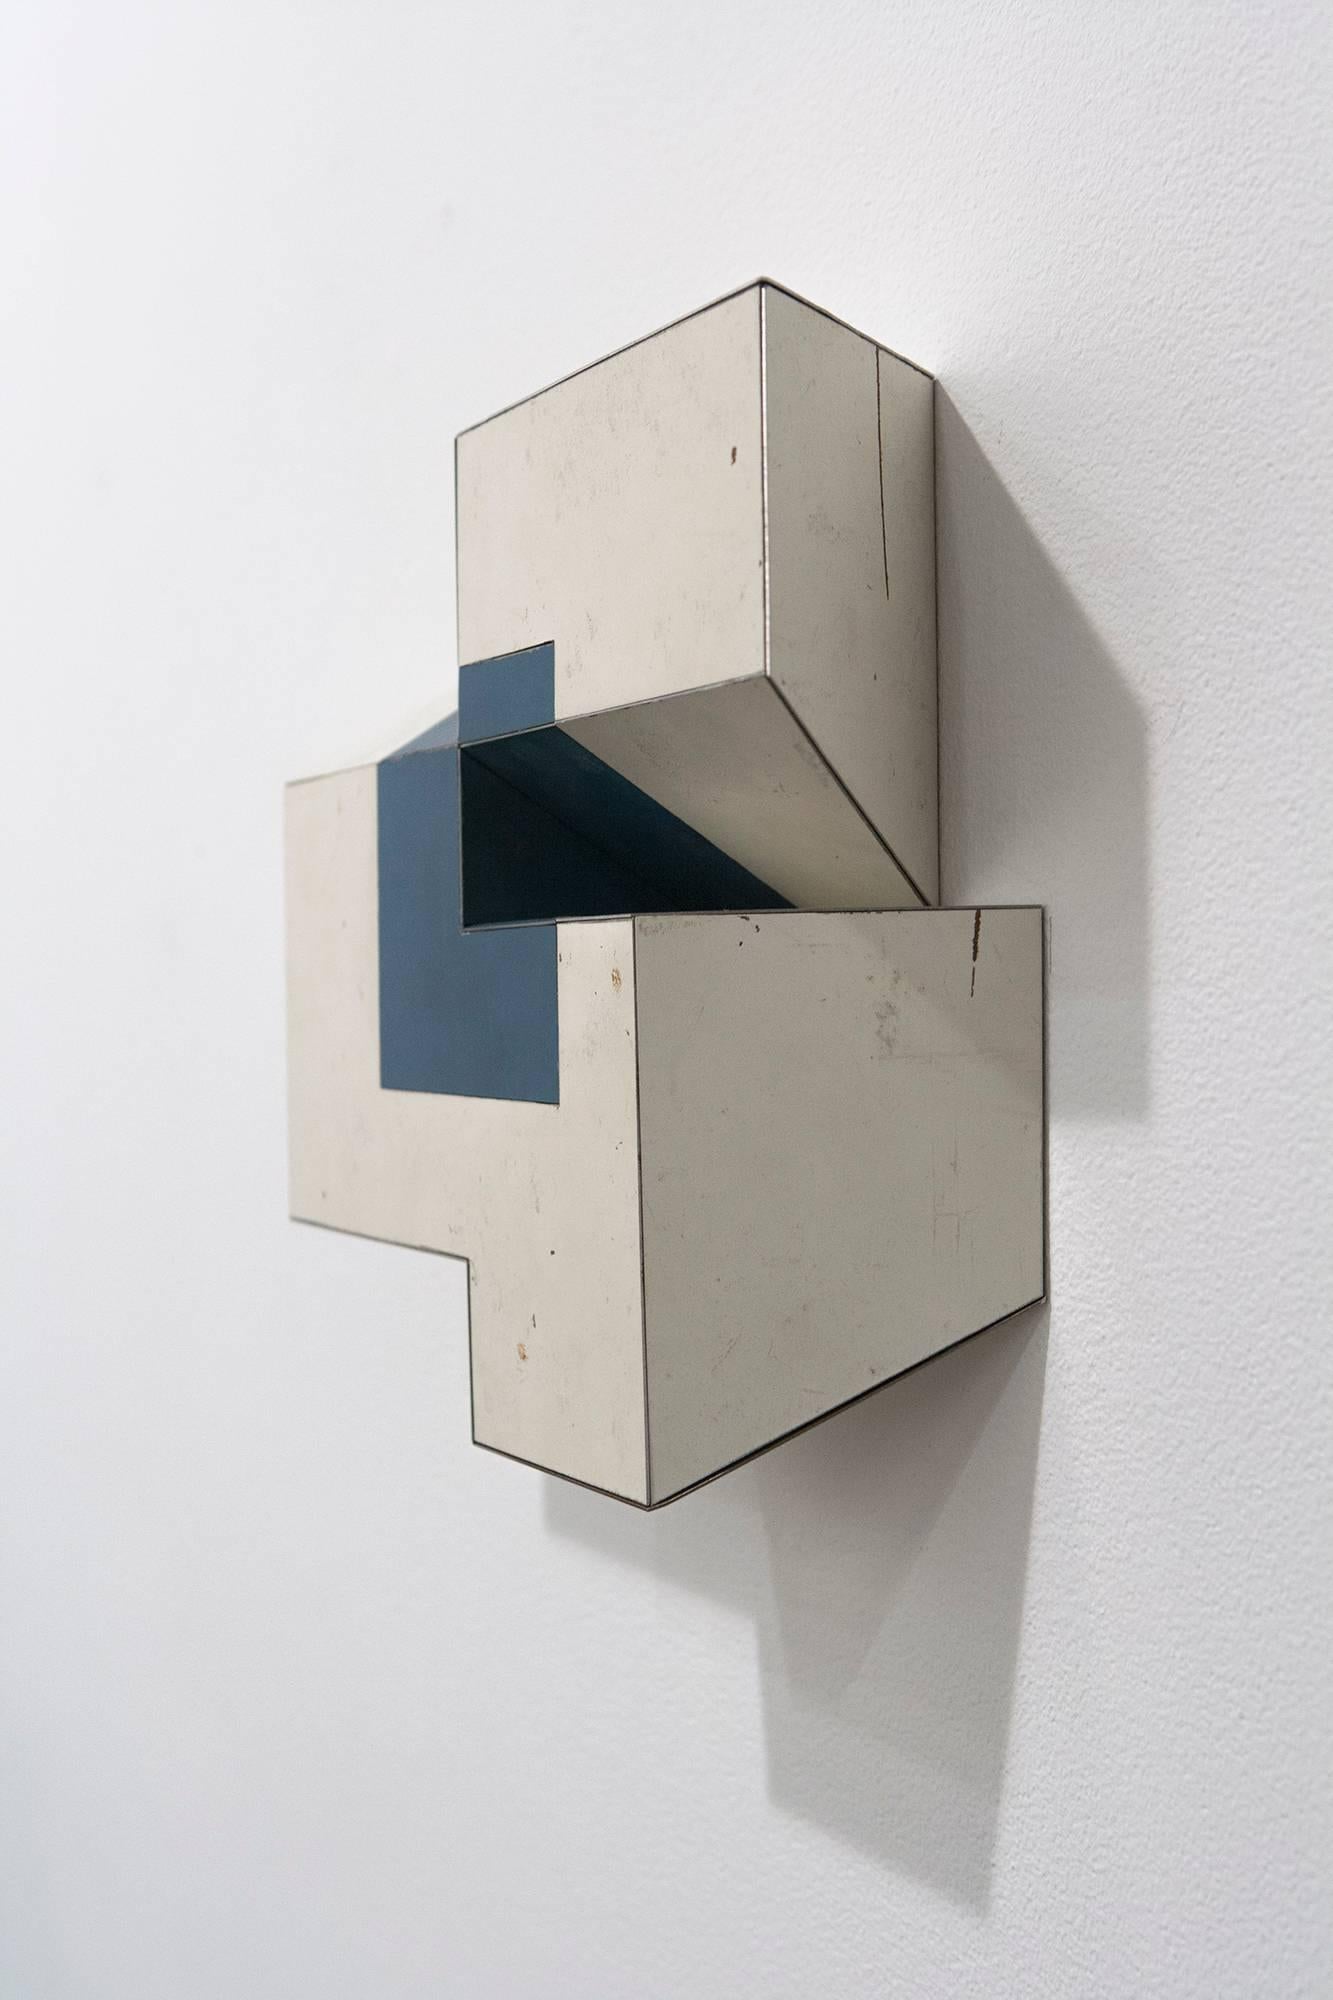 Ted Larsen's Almost Exactly is a hard-edged sculptural, mixed media painting. Primary colors include white and hues of blue. Almost Exactly is a graphic, architectural, minimalist three dimensional painting. Constructivist, Bauhaus, abstract